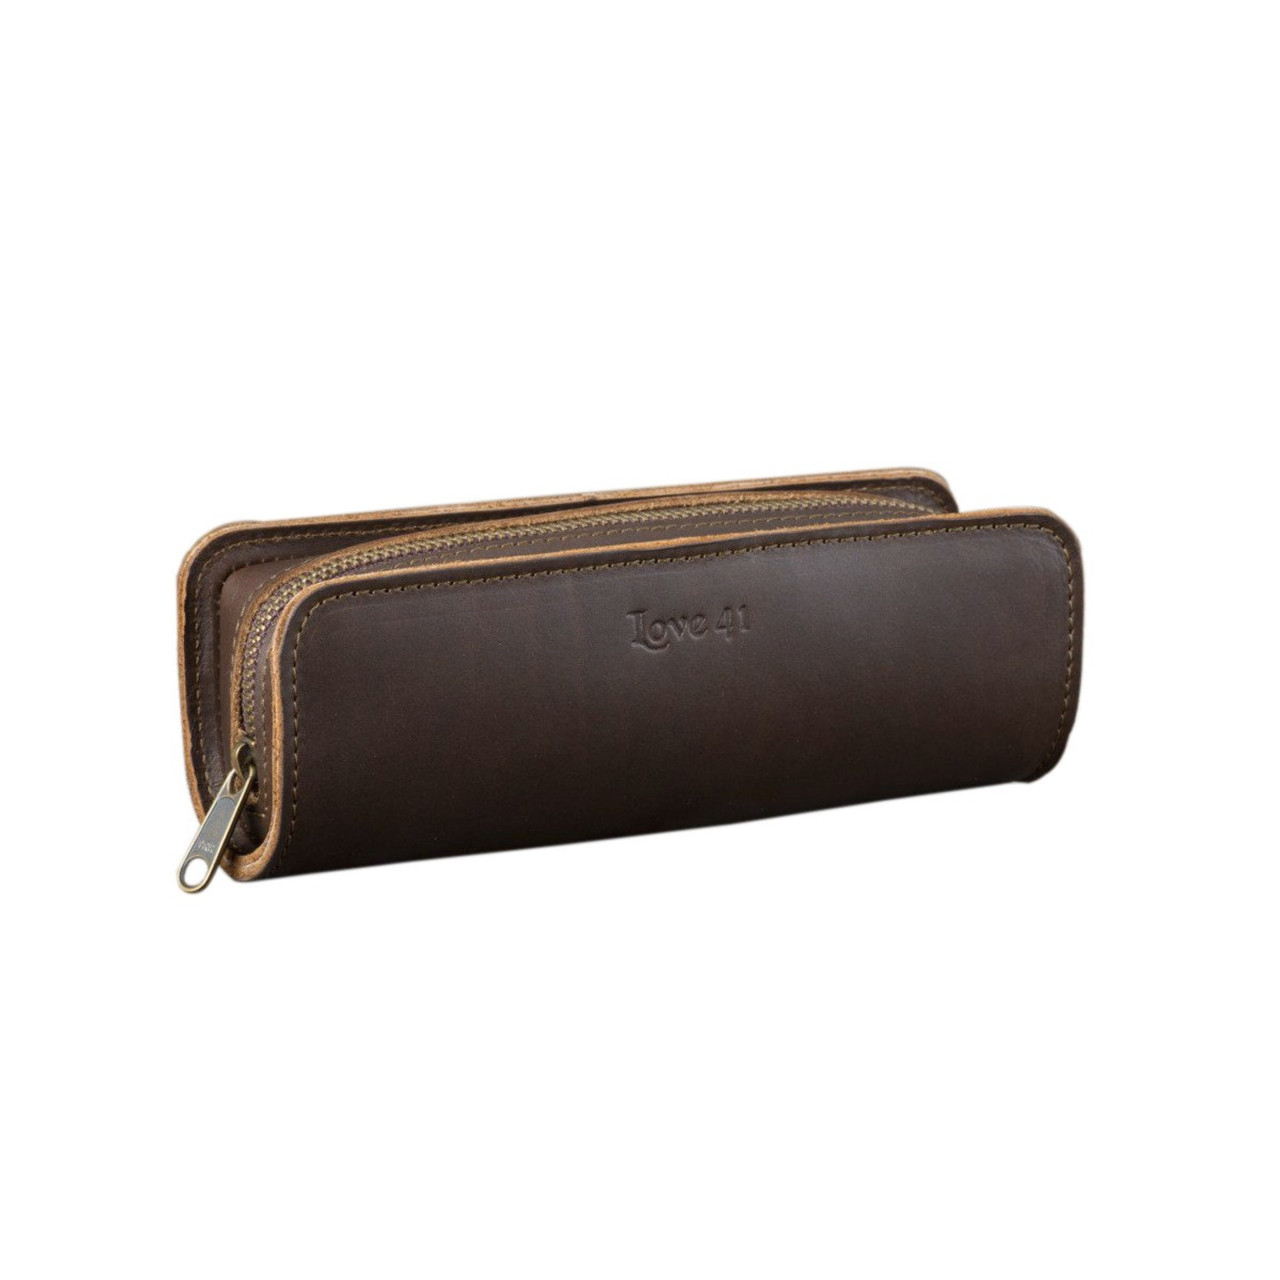 Leather Pencil Pouch, Made for You